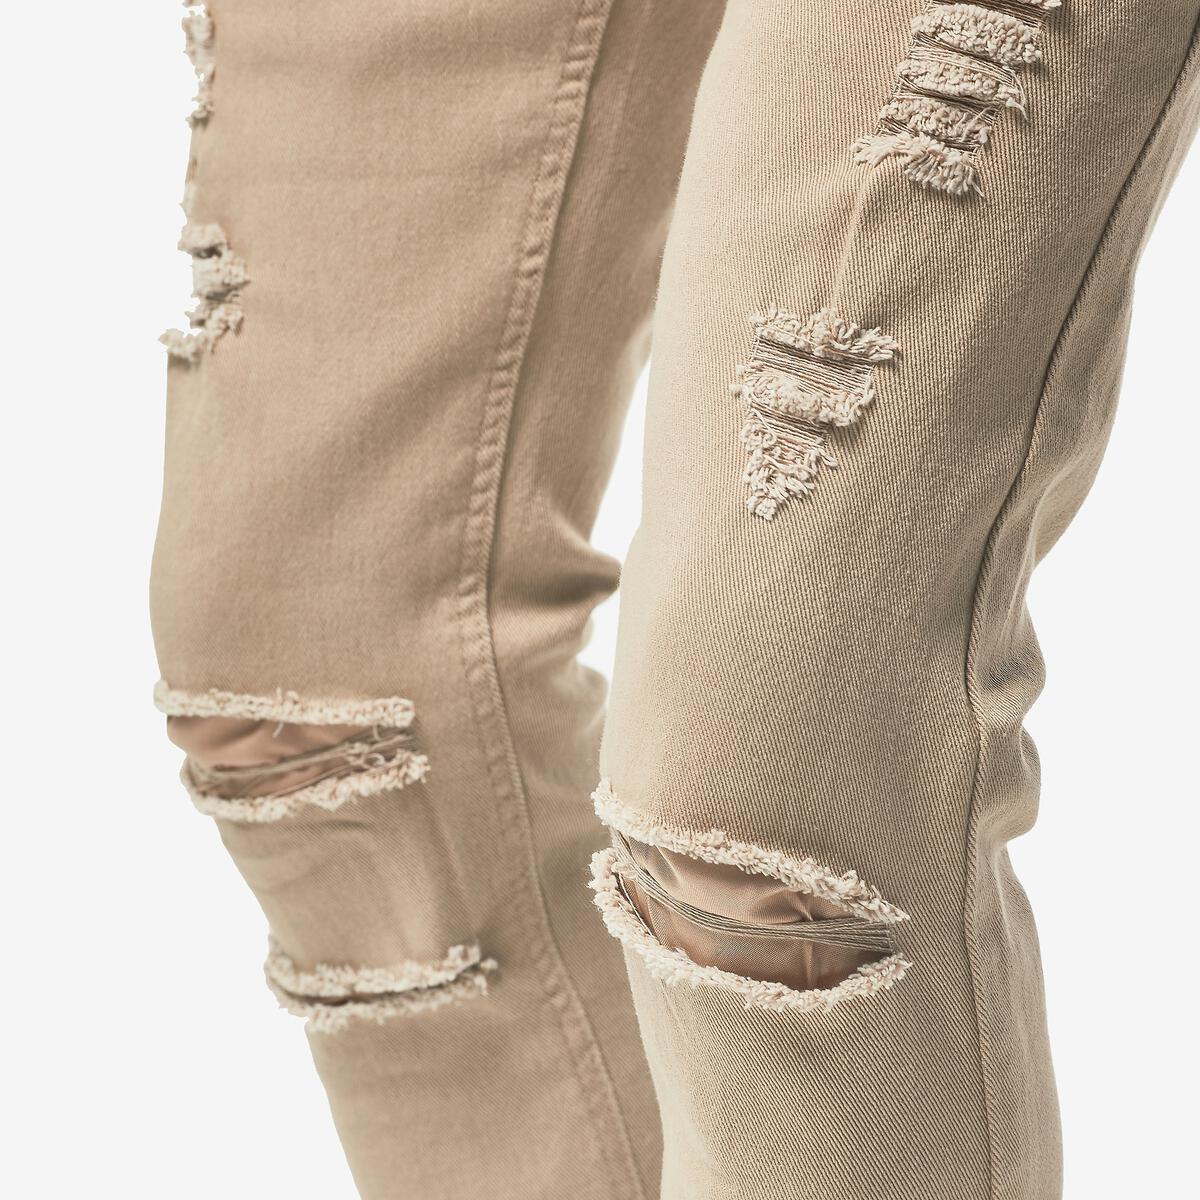 COPPER RIVET TWILL PANTS WITH RIPS KHAKI JEANS